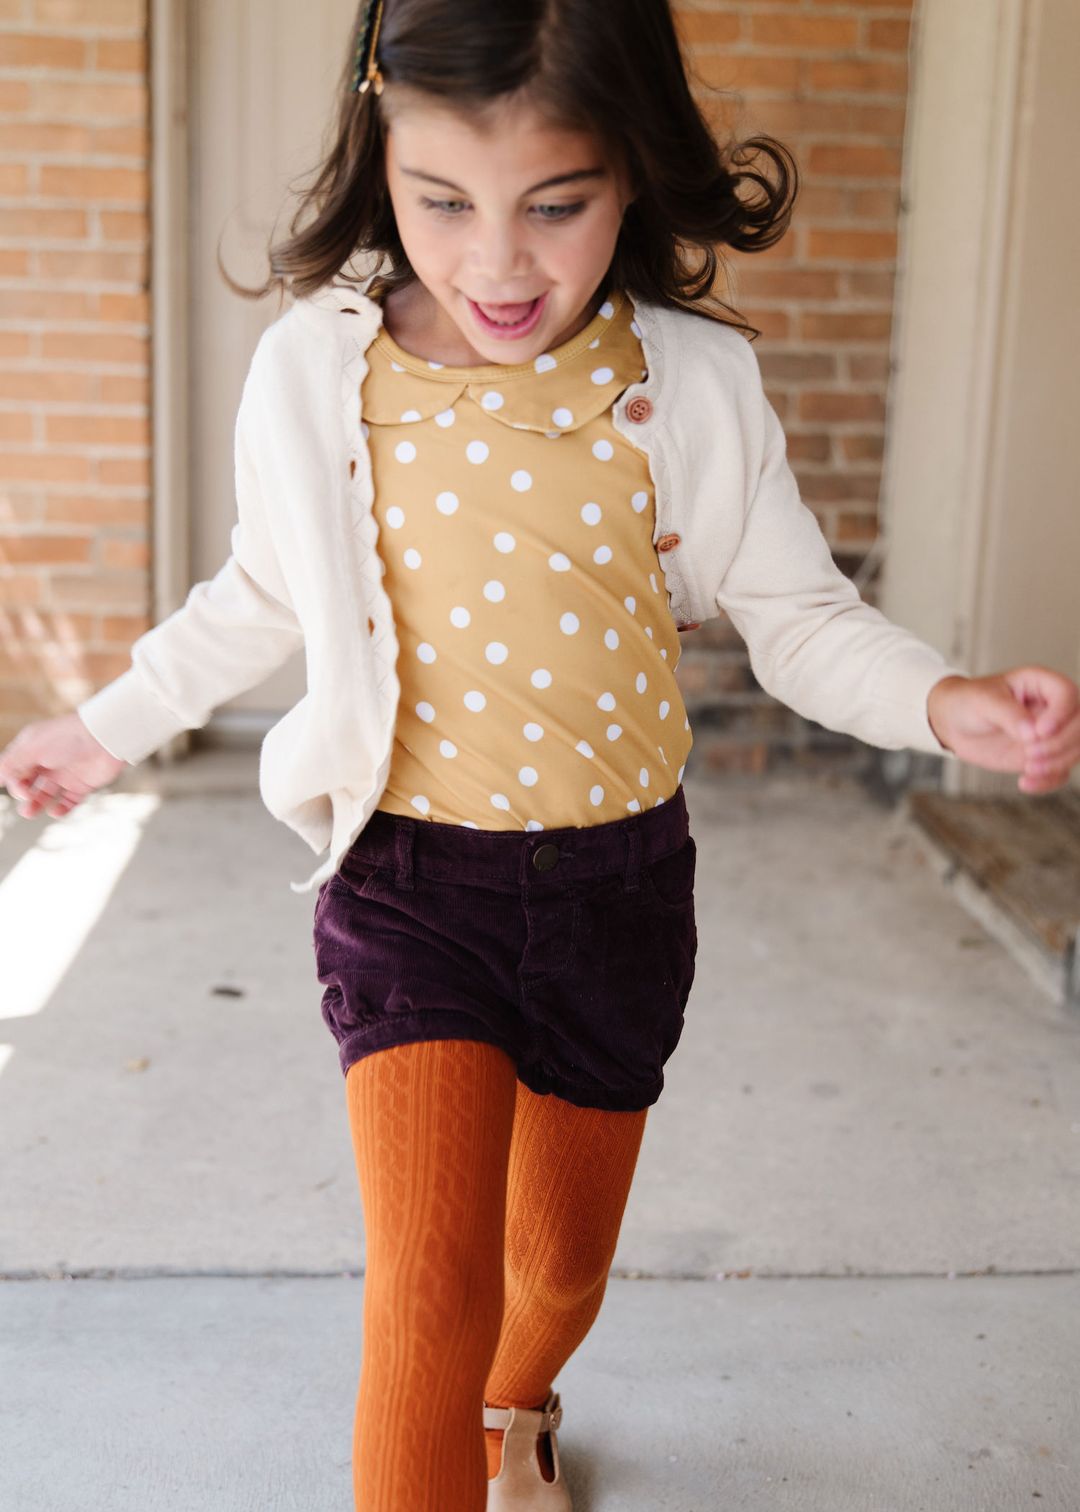 Dusty Plum Cable Knit Tights – Natural Okie Baby